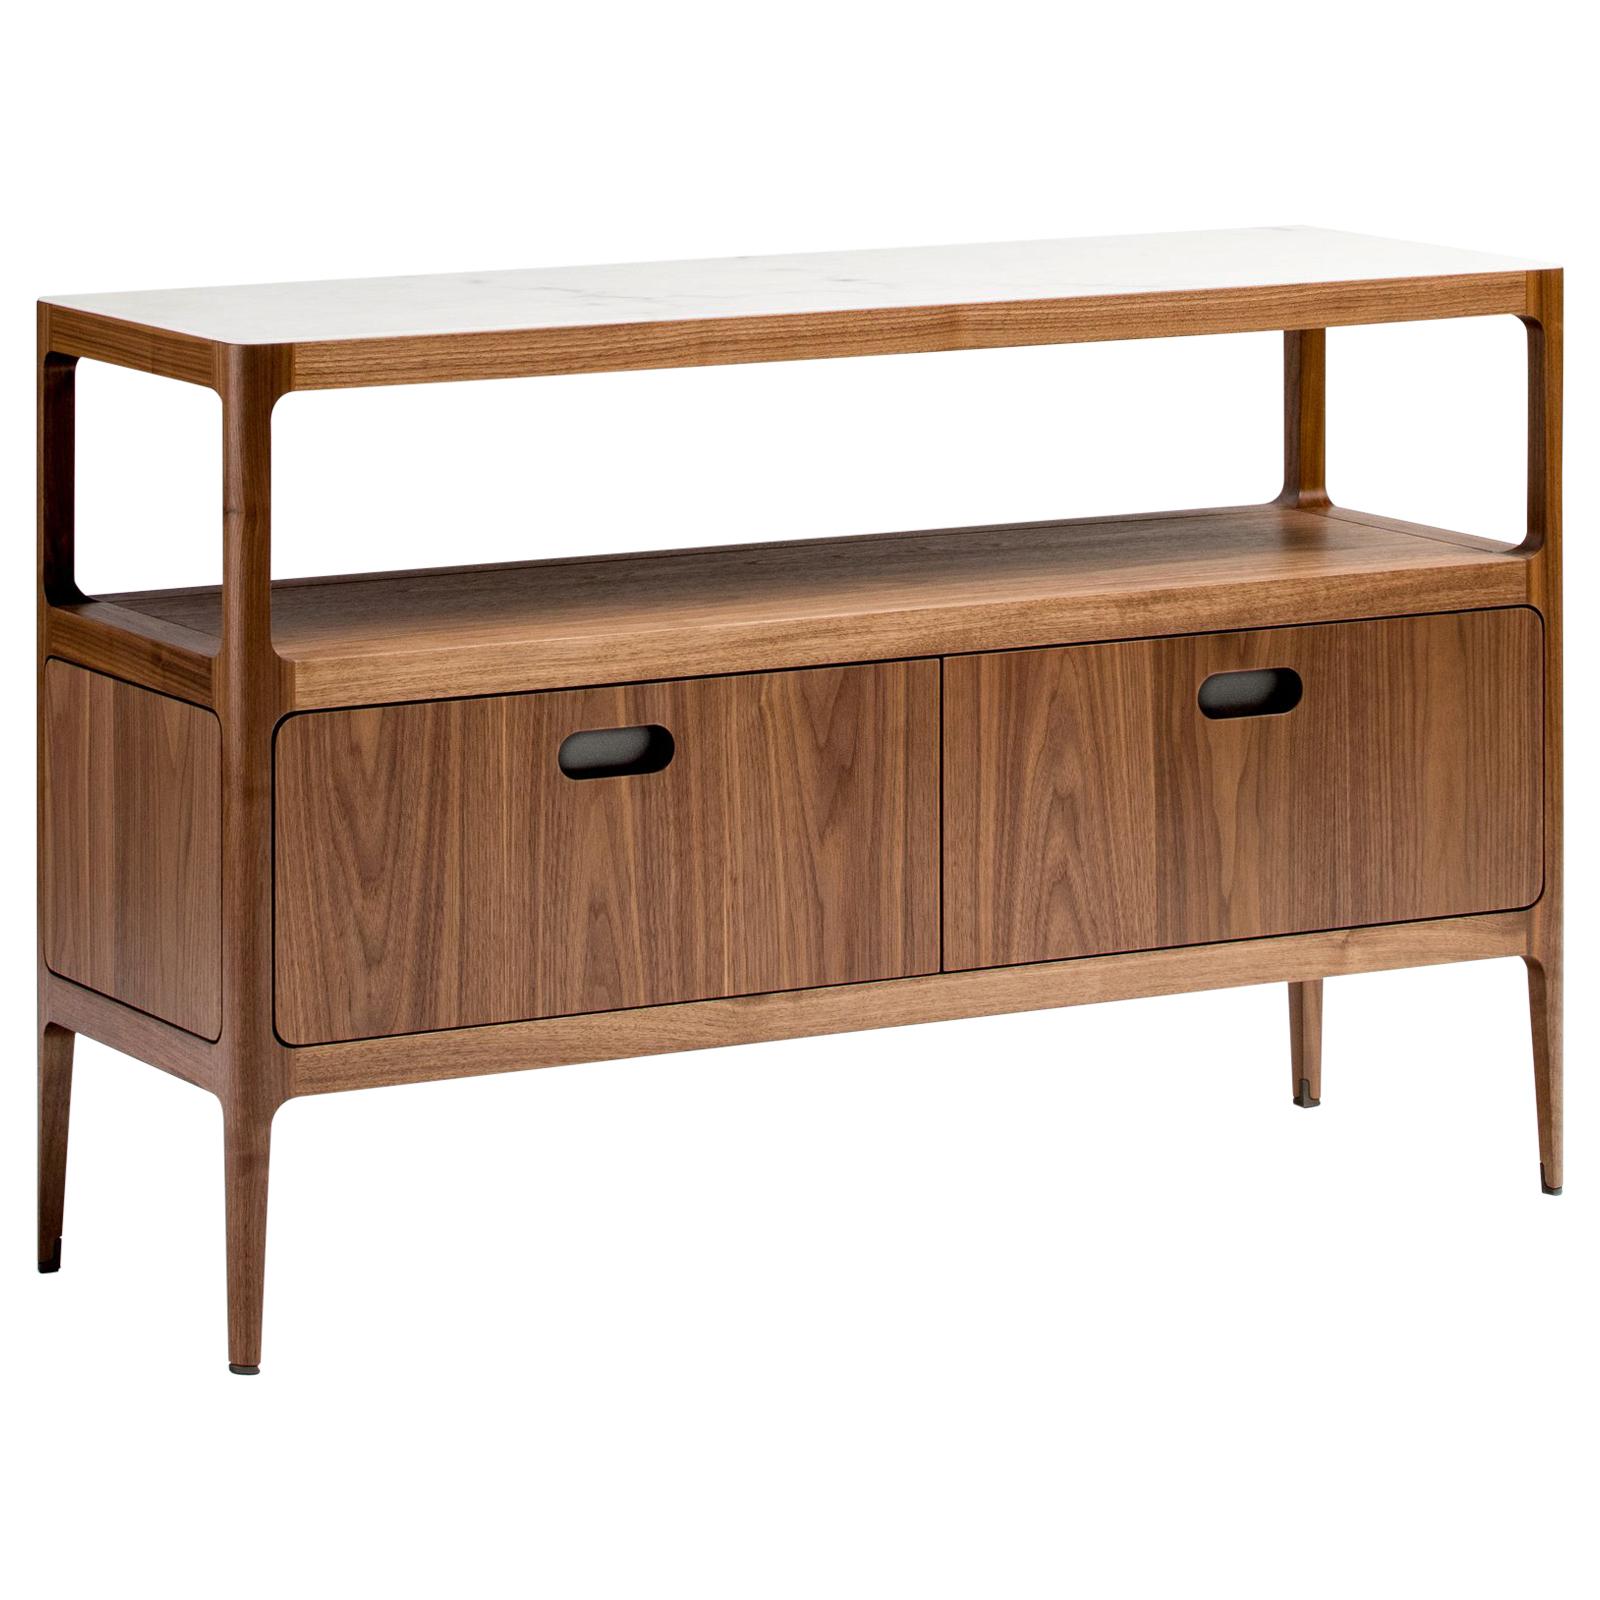 Customizable Credenza by Munson Furniture in Walnut with Alabaster Resin Top im Angebot